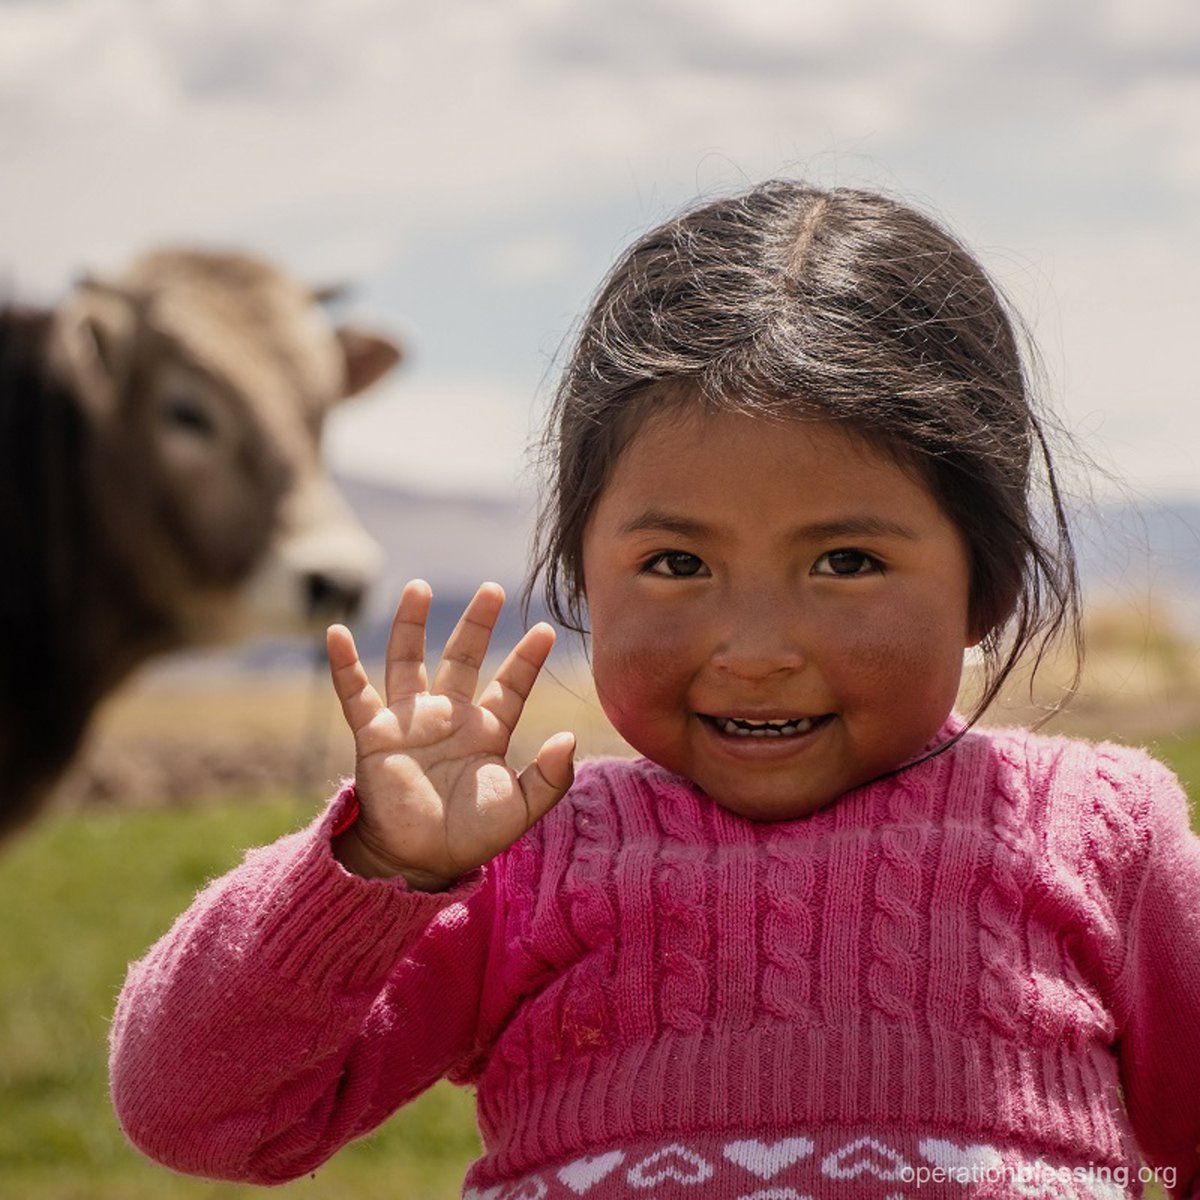 Gaby, age 3, can say hello to a happy and healthy New Year because you helped send medical care to her remote village in #Peru, and she received treatment for acute #bronchitis. Please pray for children in need of #medical help. 
#PhotoPrayer https://t.co/TAcKx1jCYx